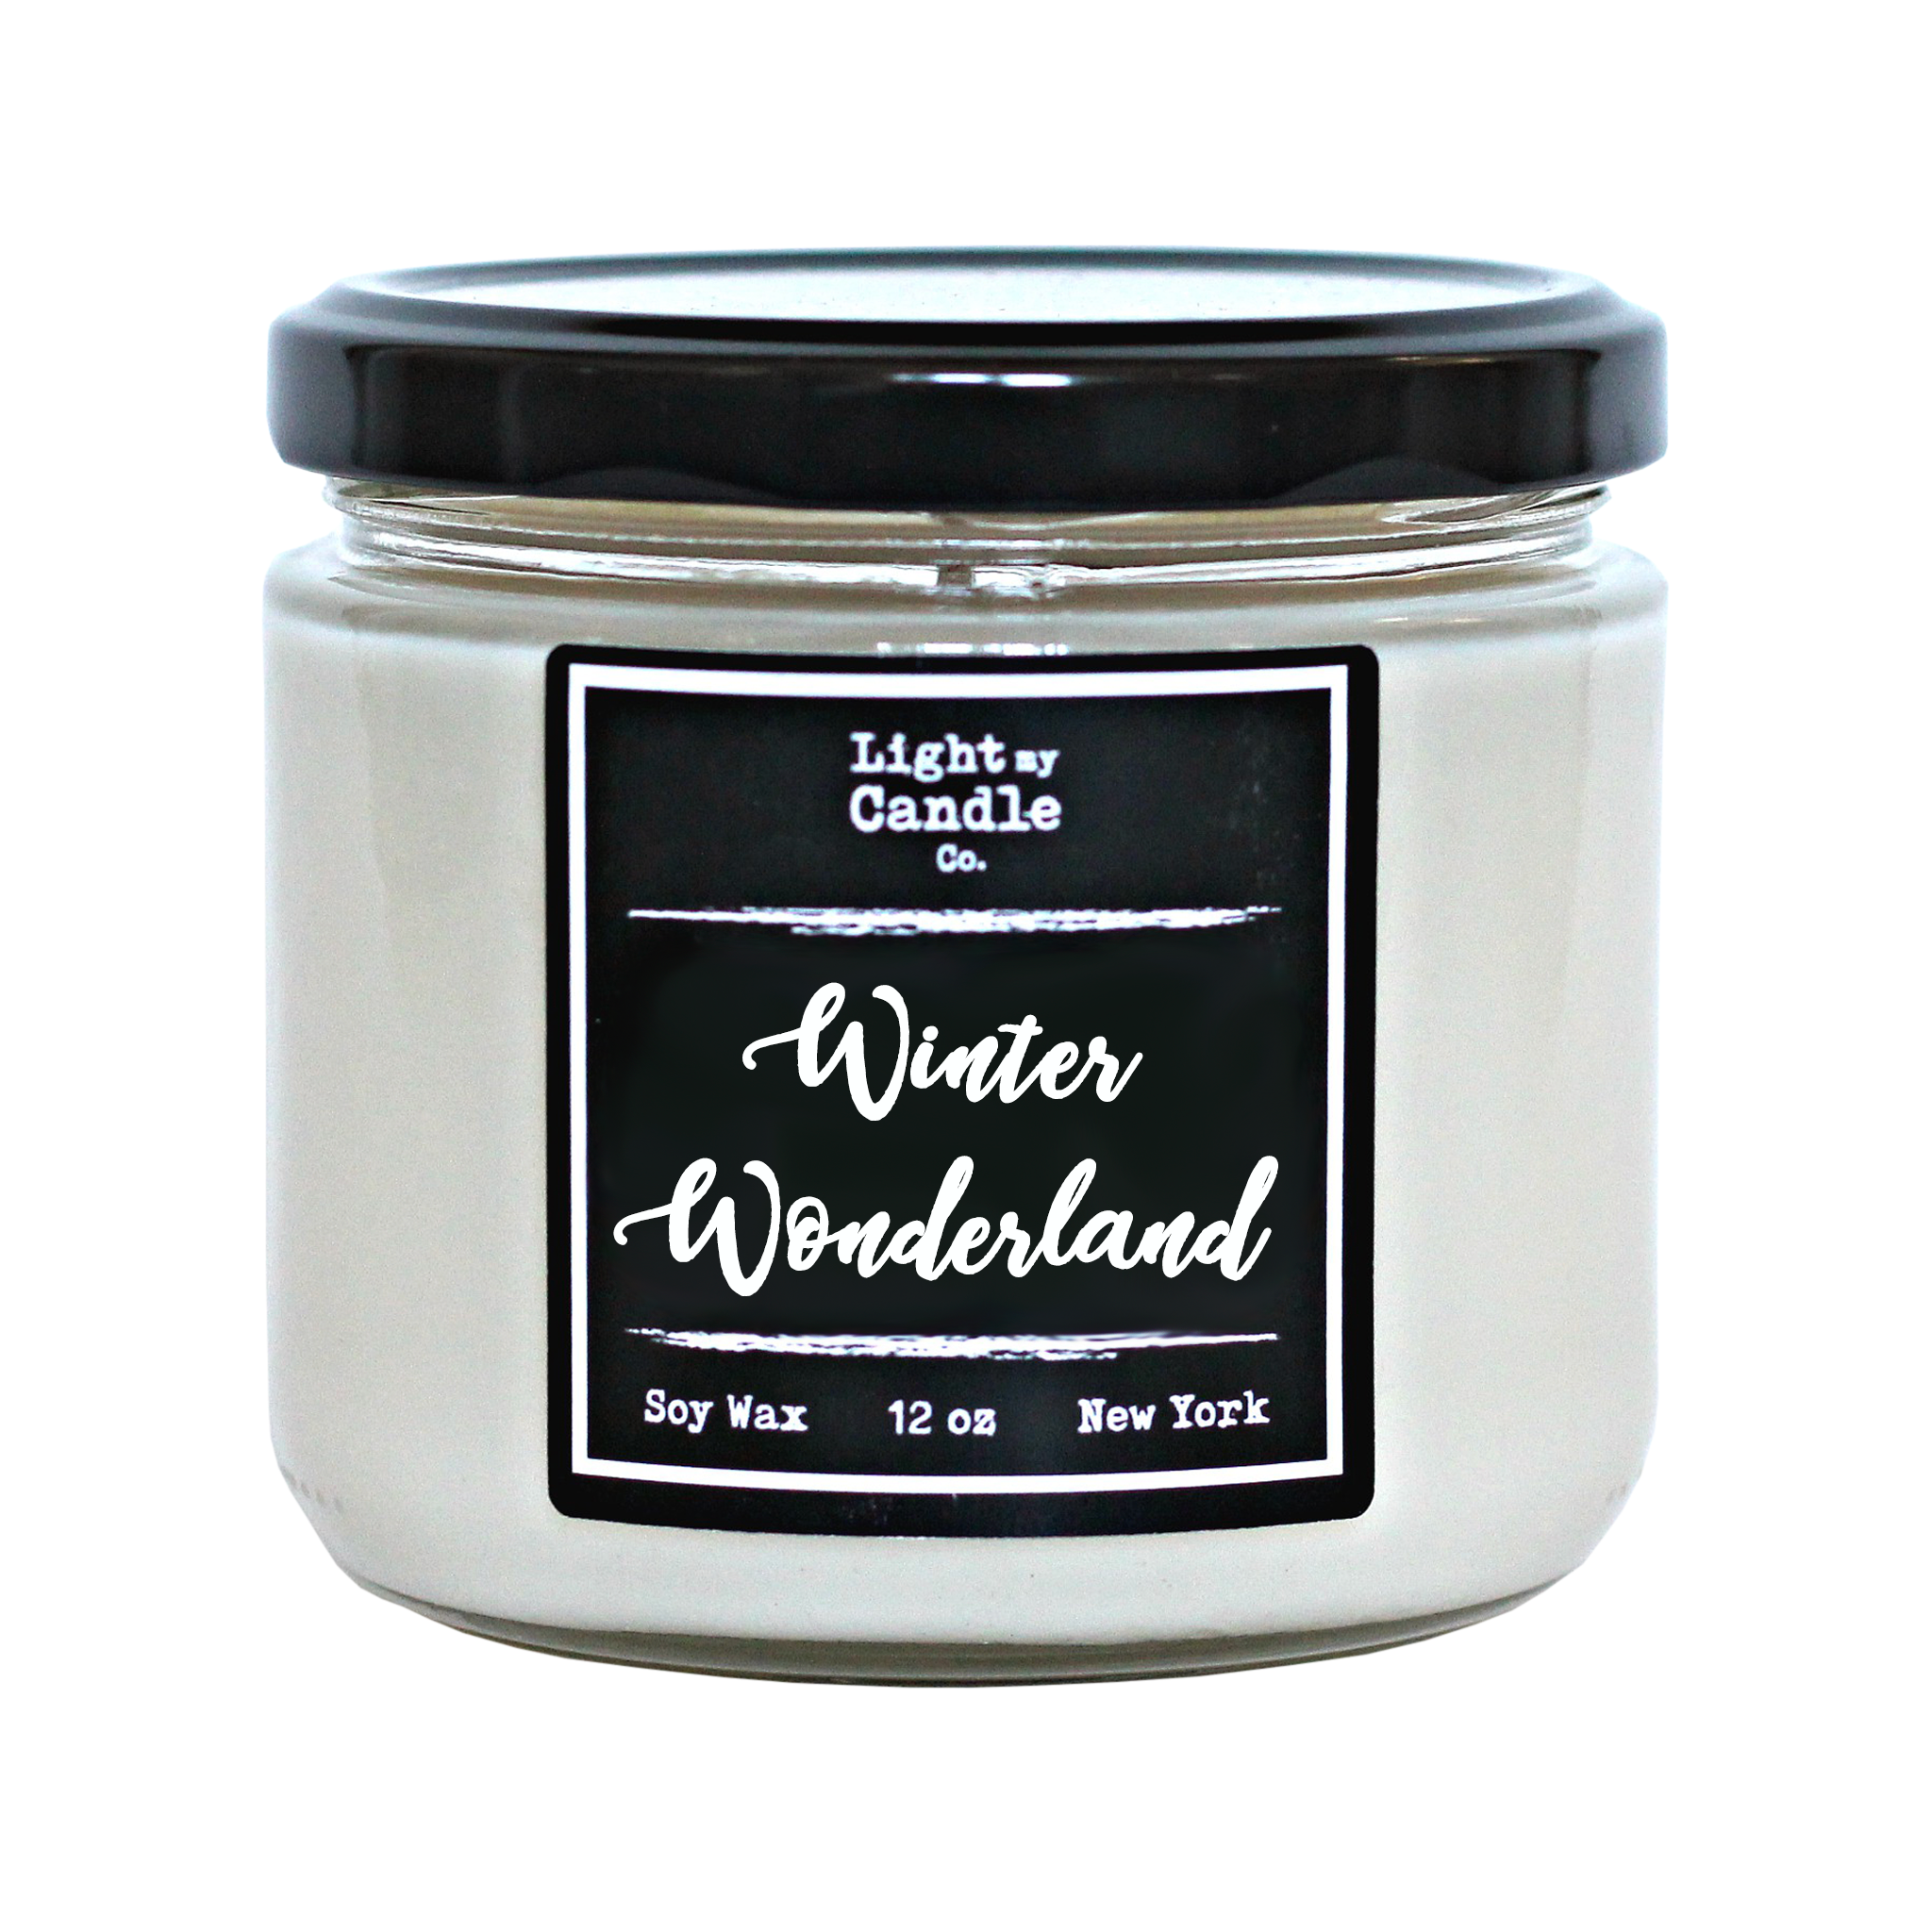 Winter Fir Candle - Clean ingredients, phthalate free fragrance